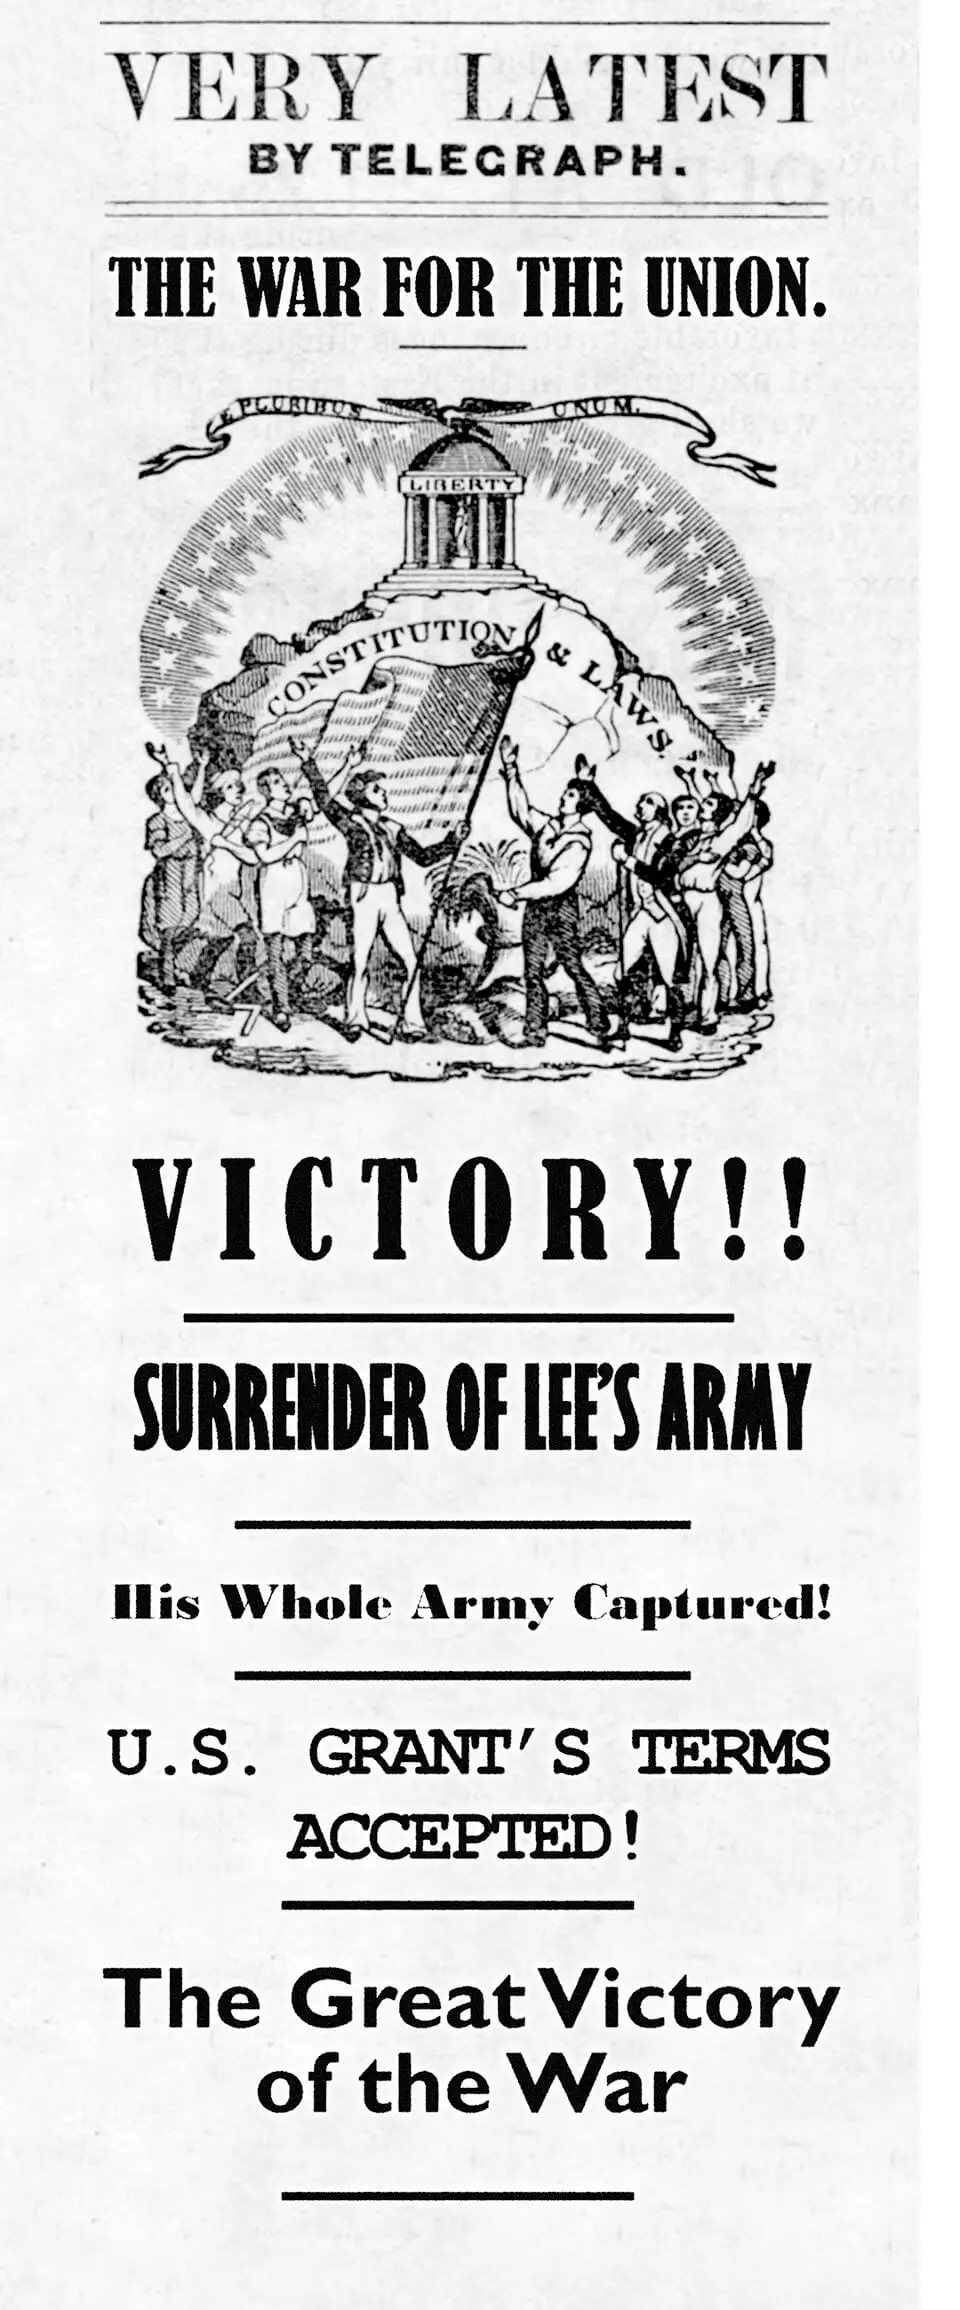 Newspaper clipping announcing “The Great Victory of the War” with different fonts and a celebratory drawing.